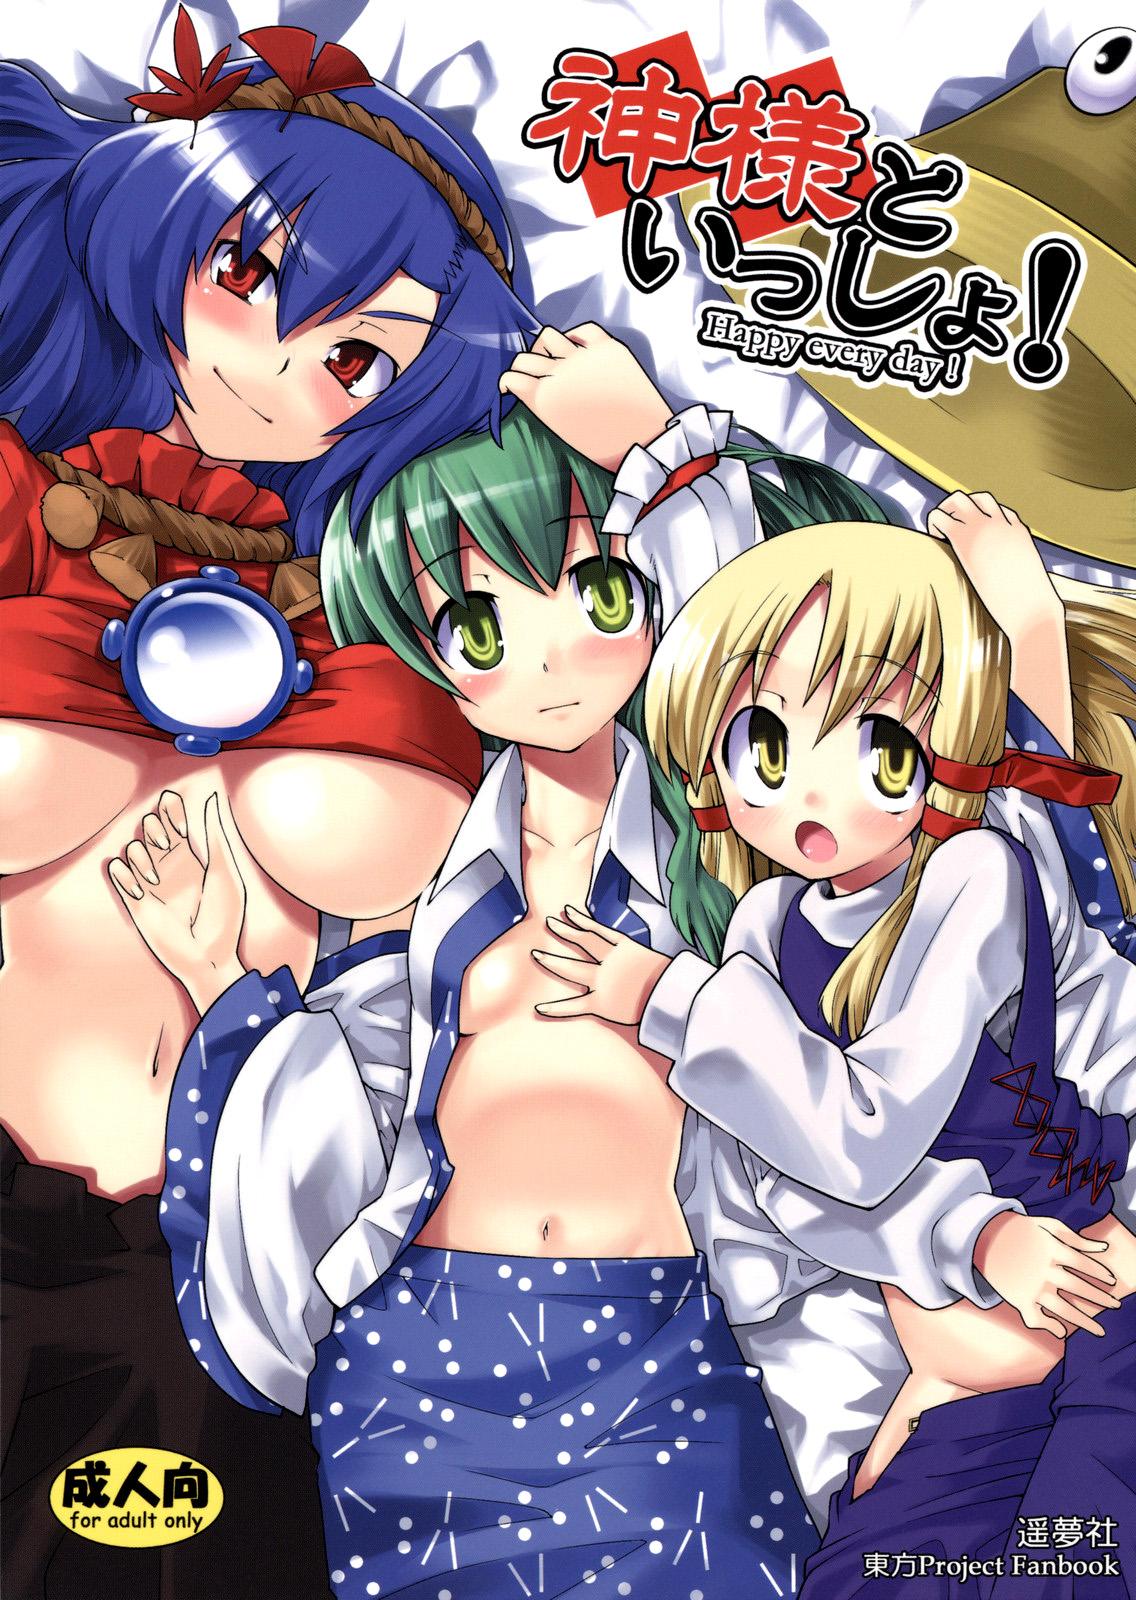 Costume Kami-sama to Issho! Happy every day! - Touhou project Best Blowjob - Page 1